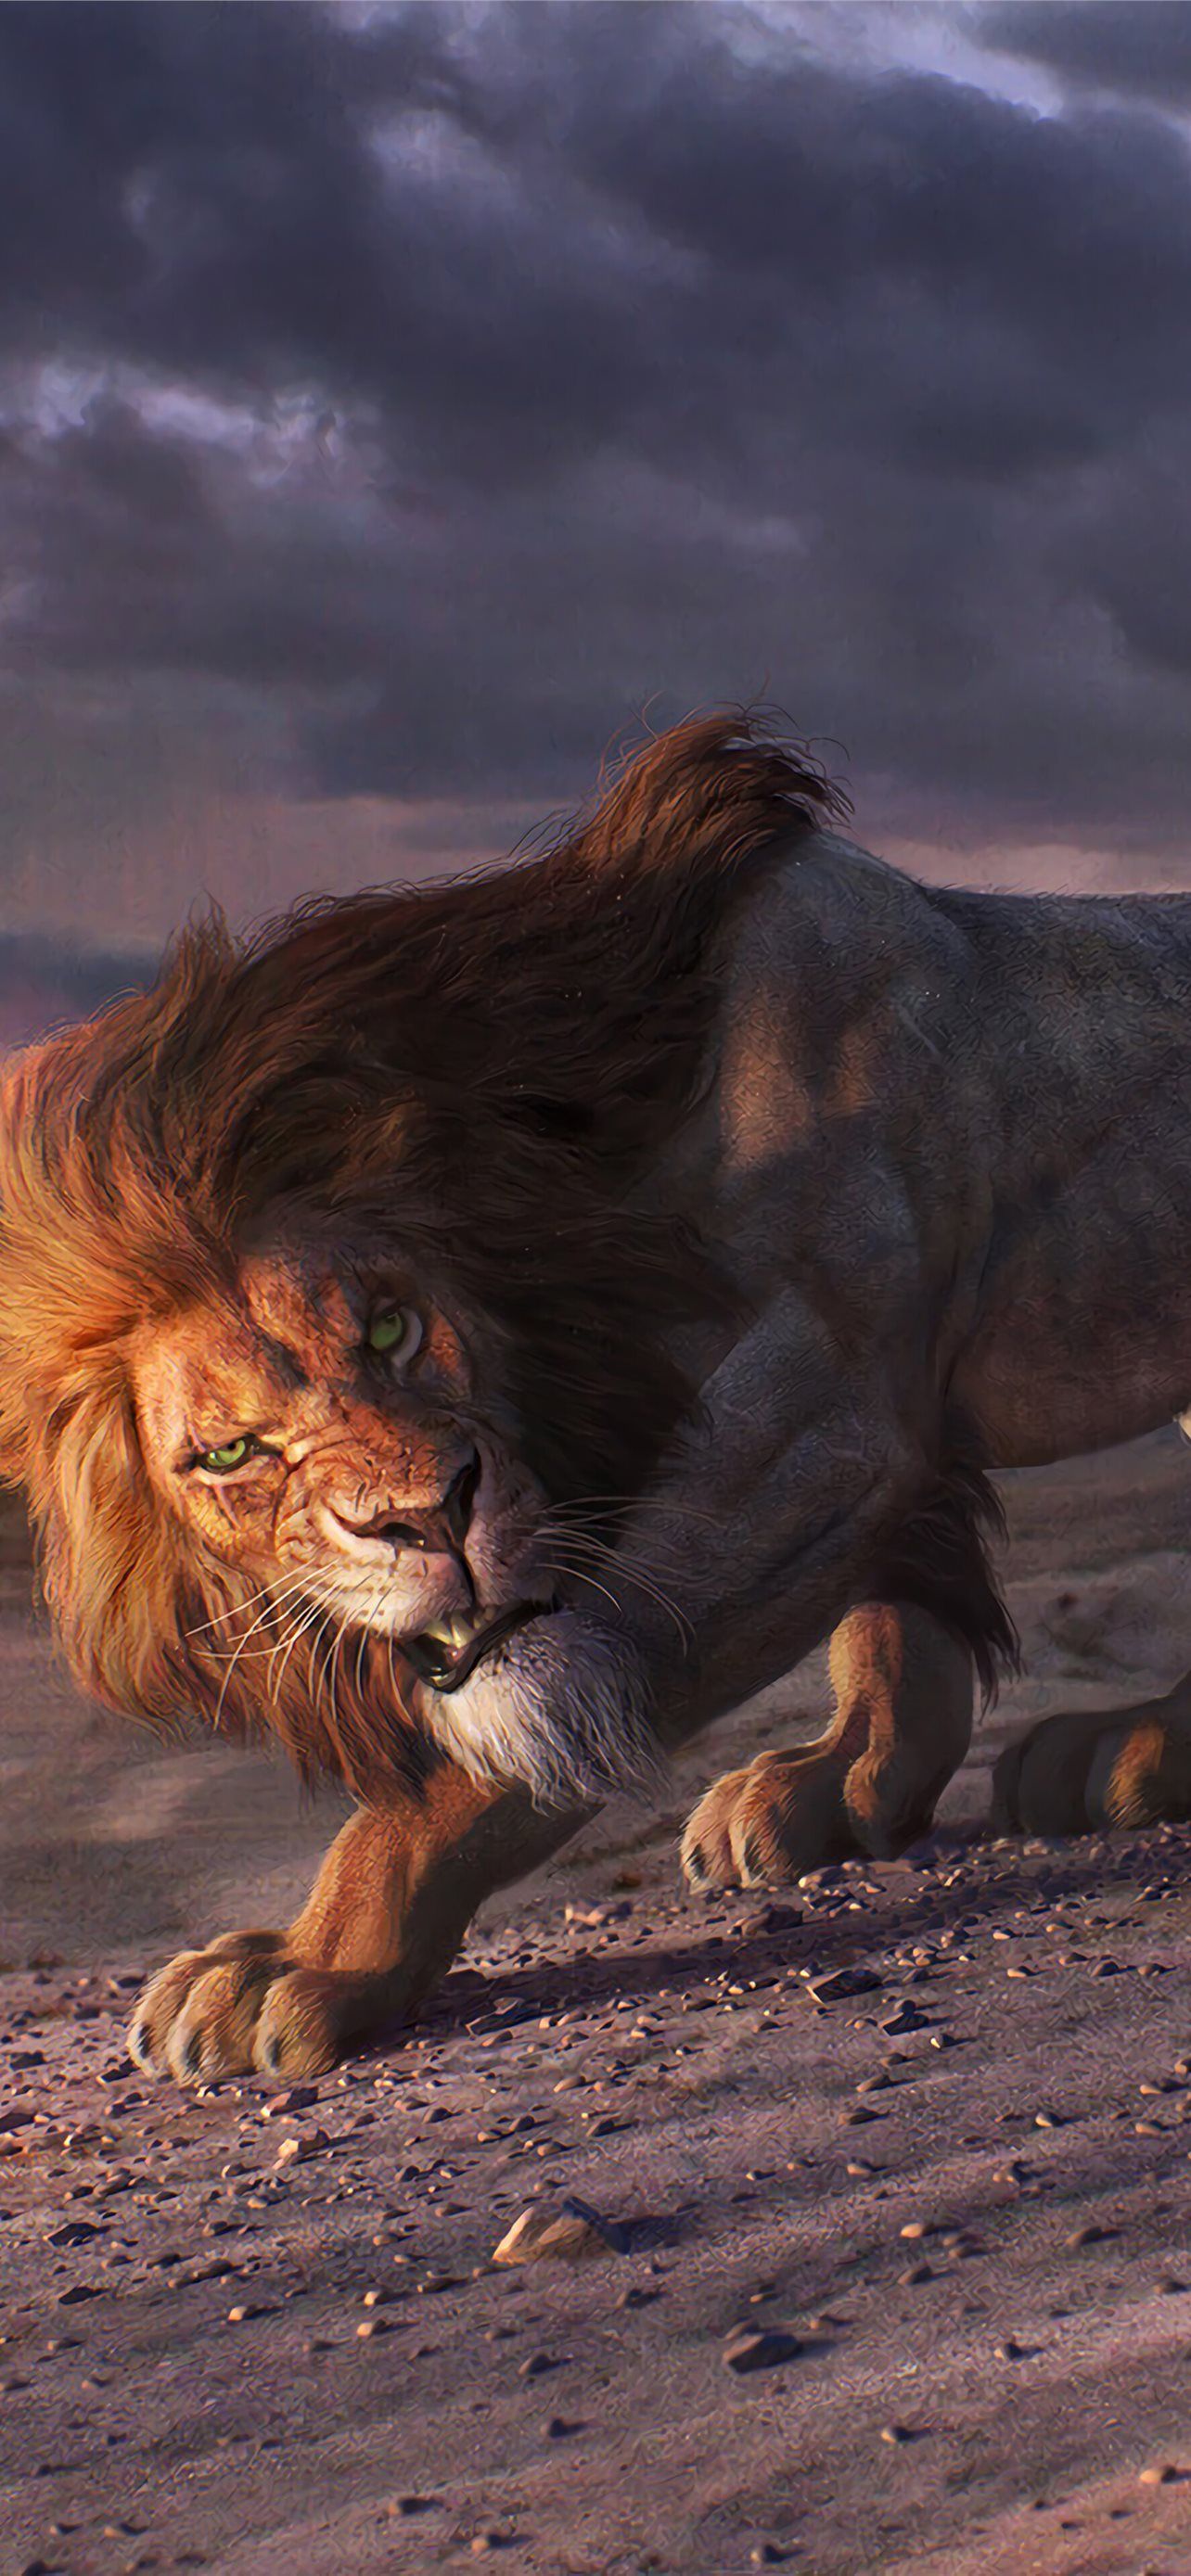 Scar The Lion King Movie 2019 4K phone HD I. iPhone Wallpaper Free Download